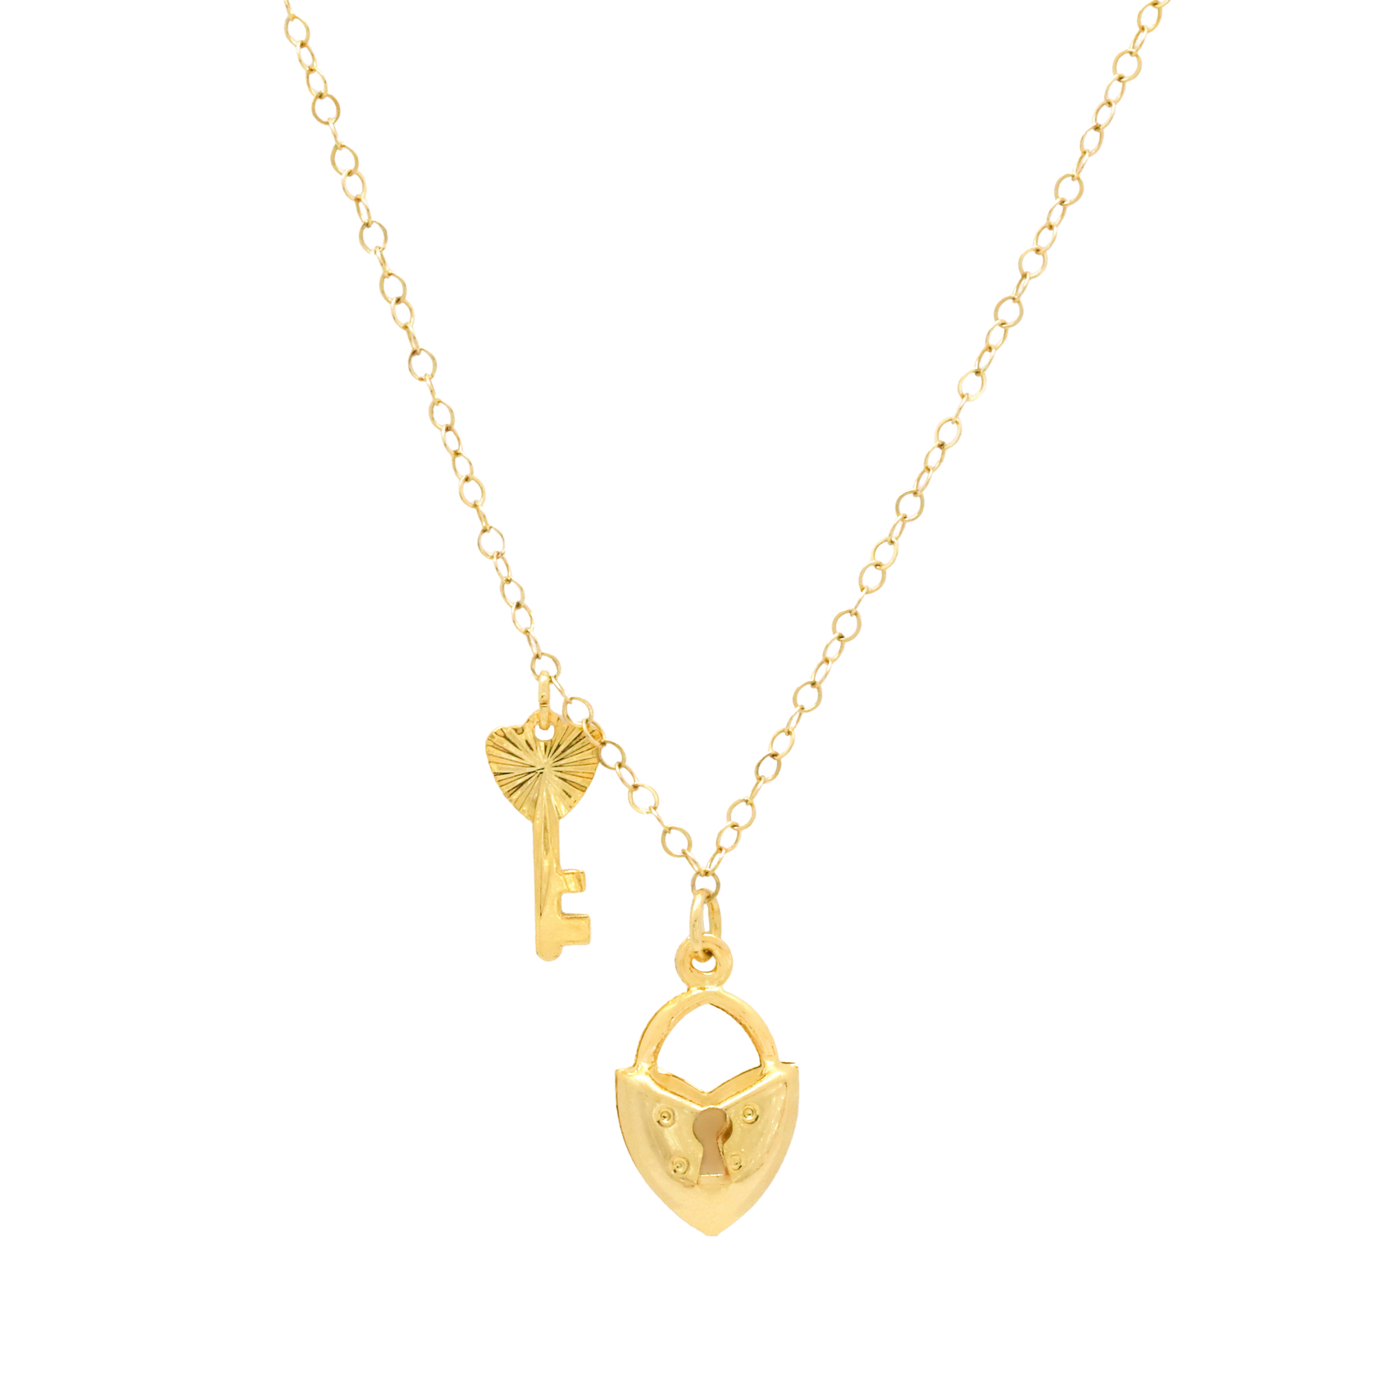 Gold heart lock and key pendant necklace